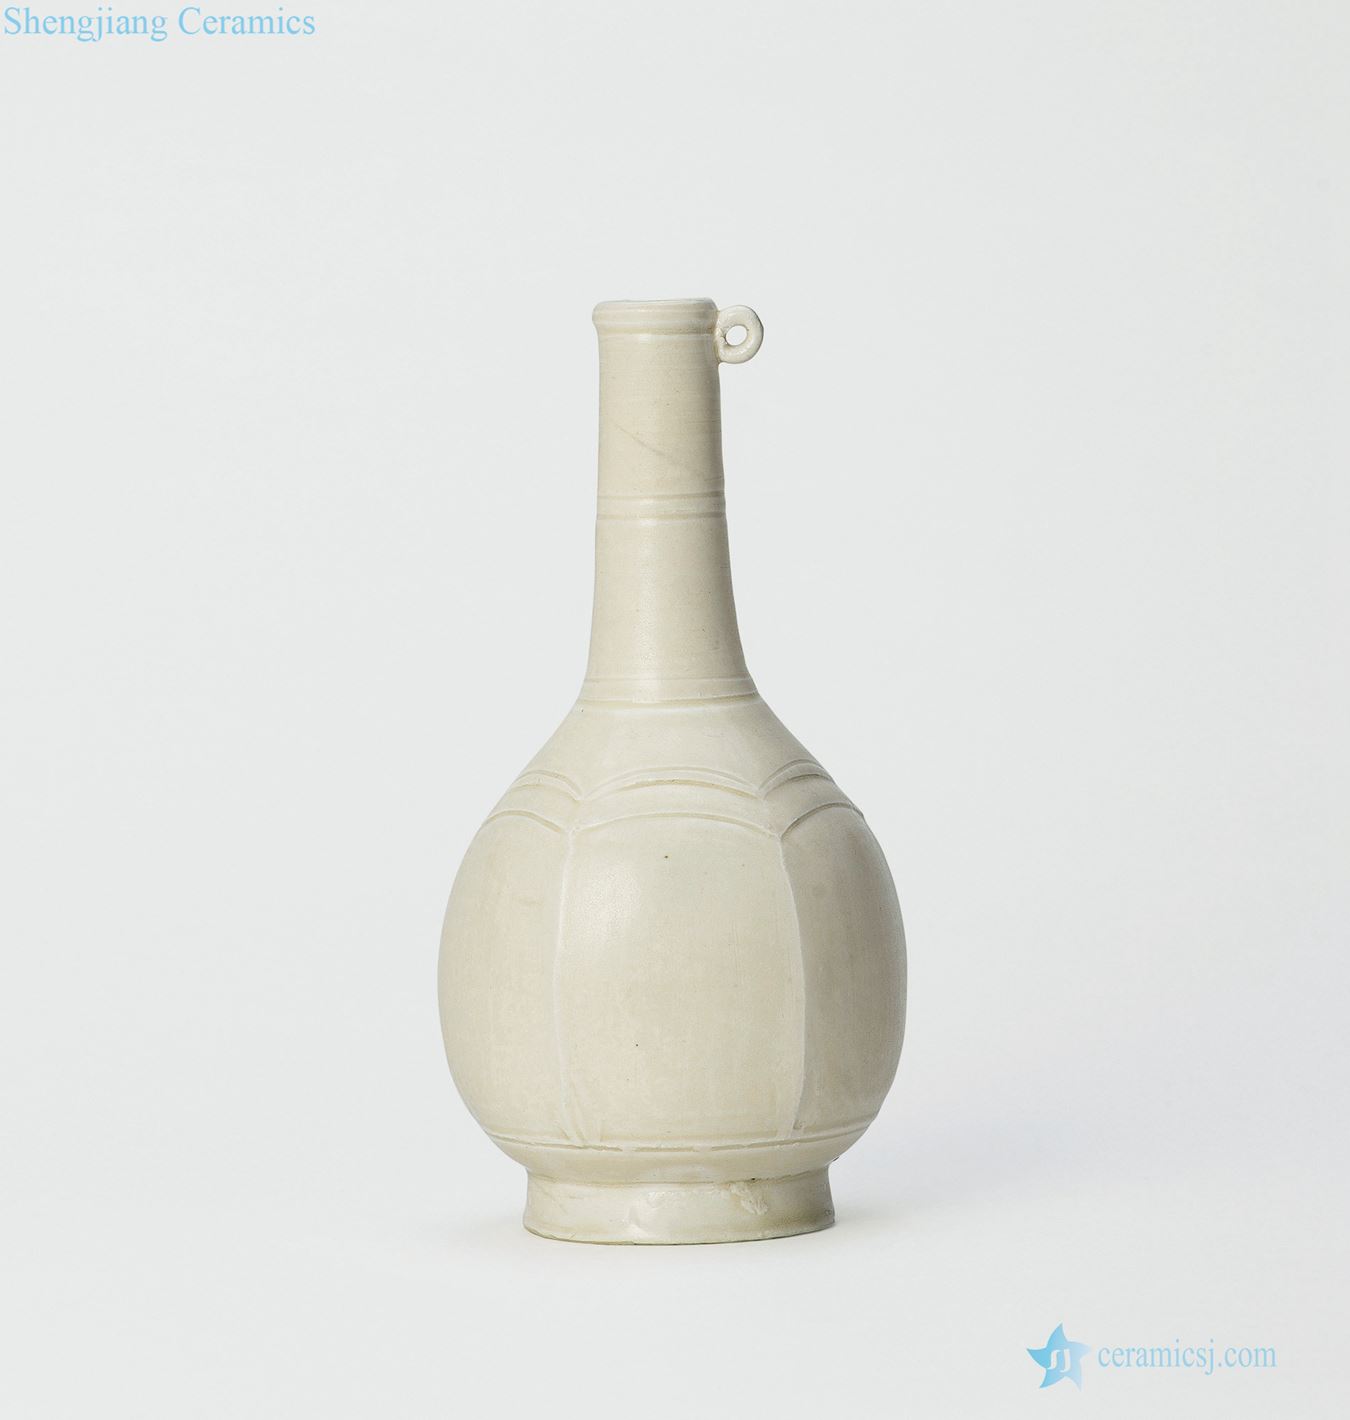 The early northern song dynasty kiln is a vase